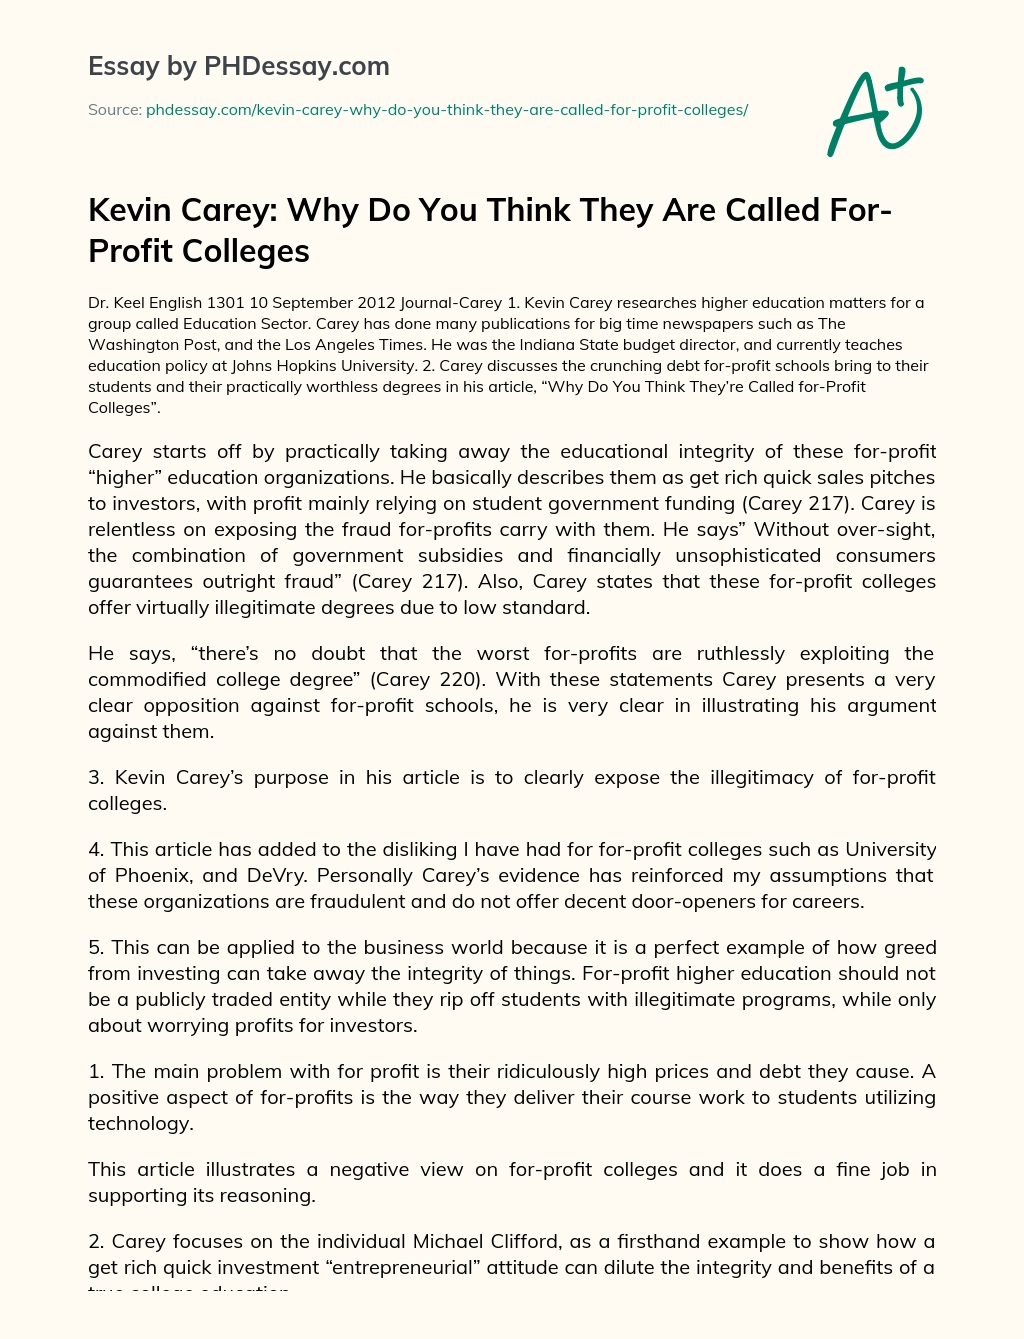 Kevin Carey: Why Do You Think They Are Called For-Profit Colleges essay